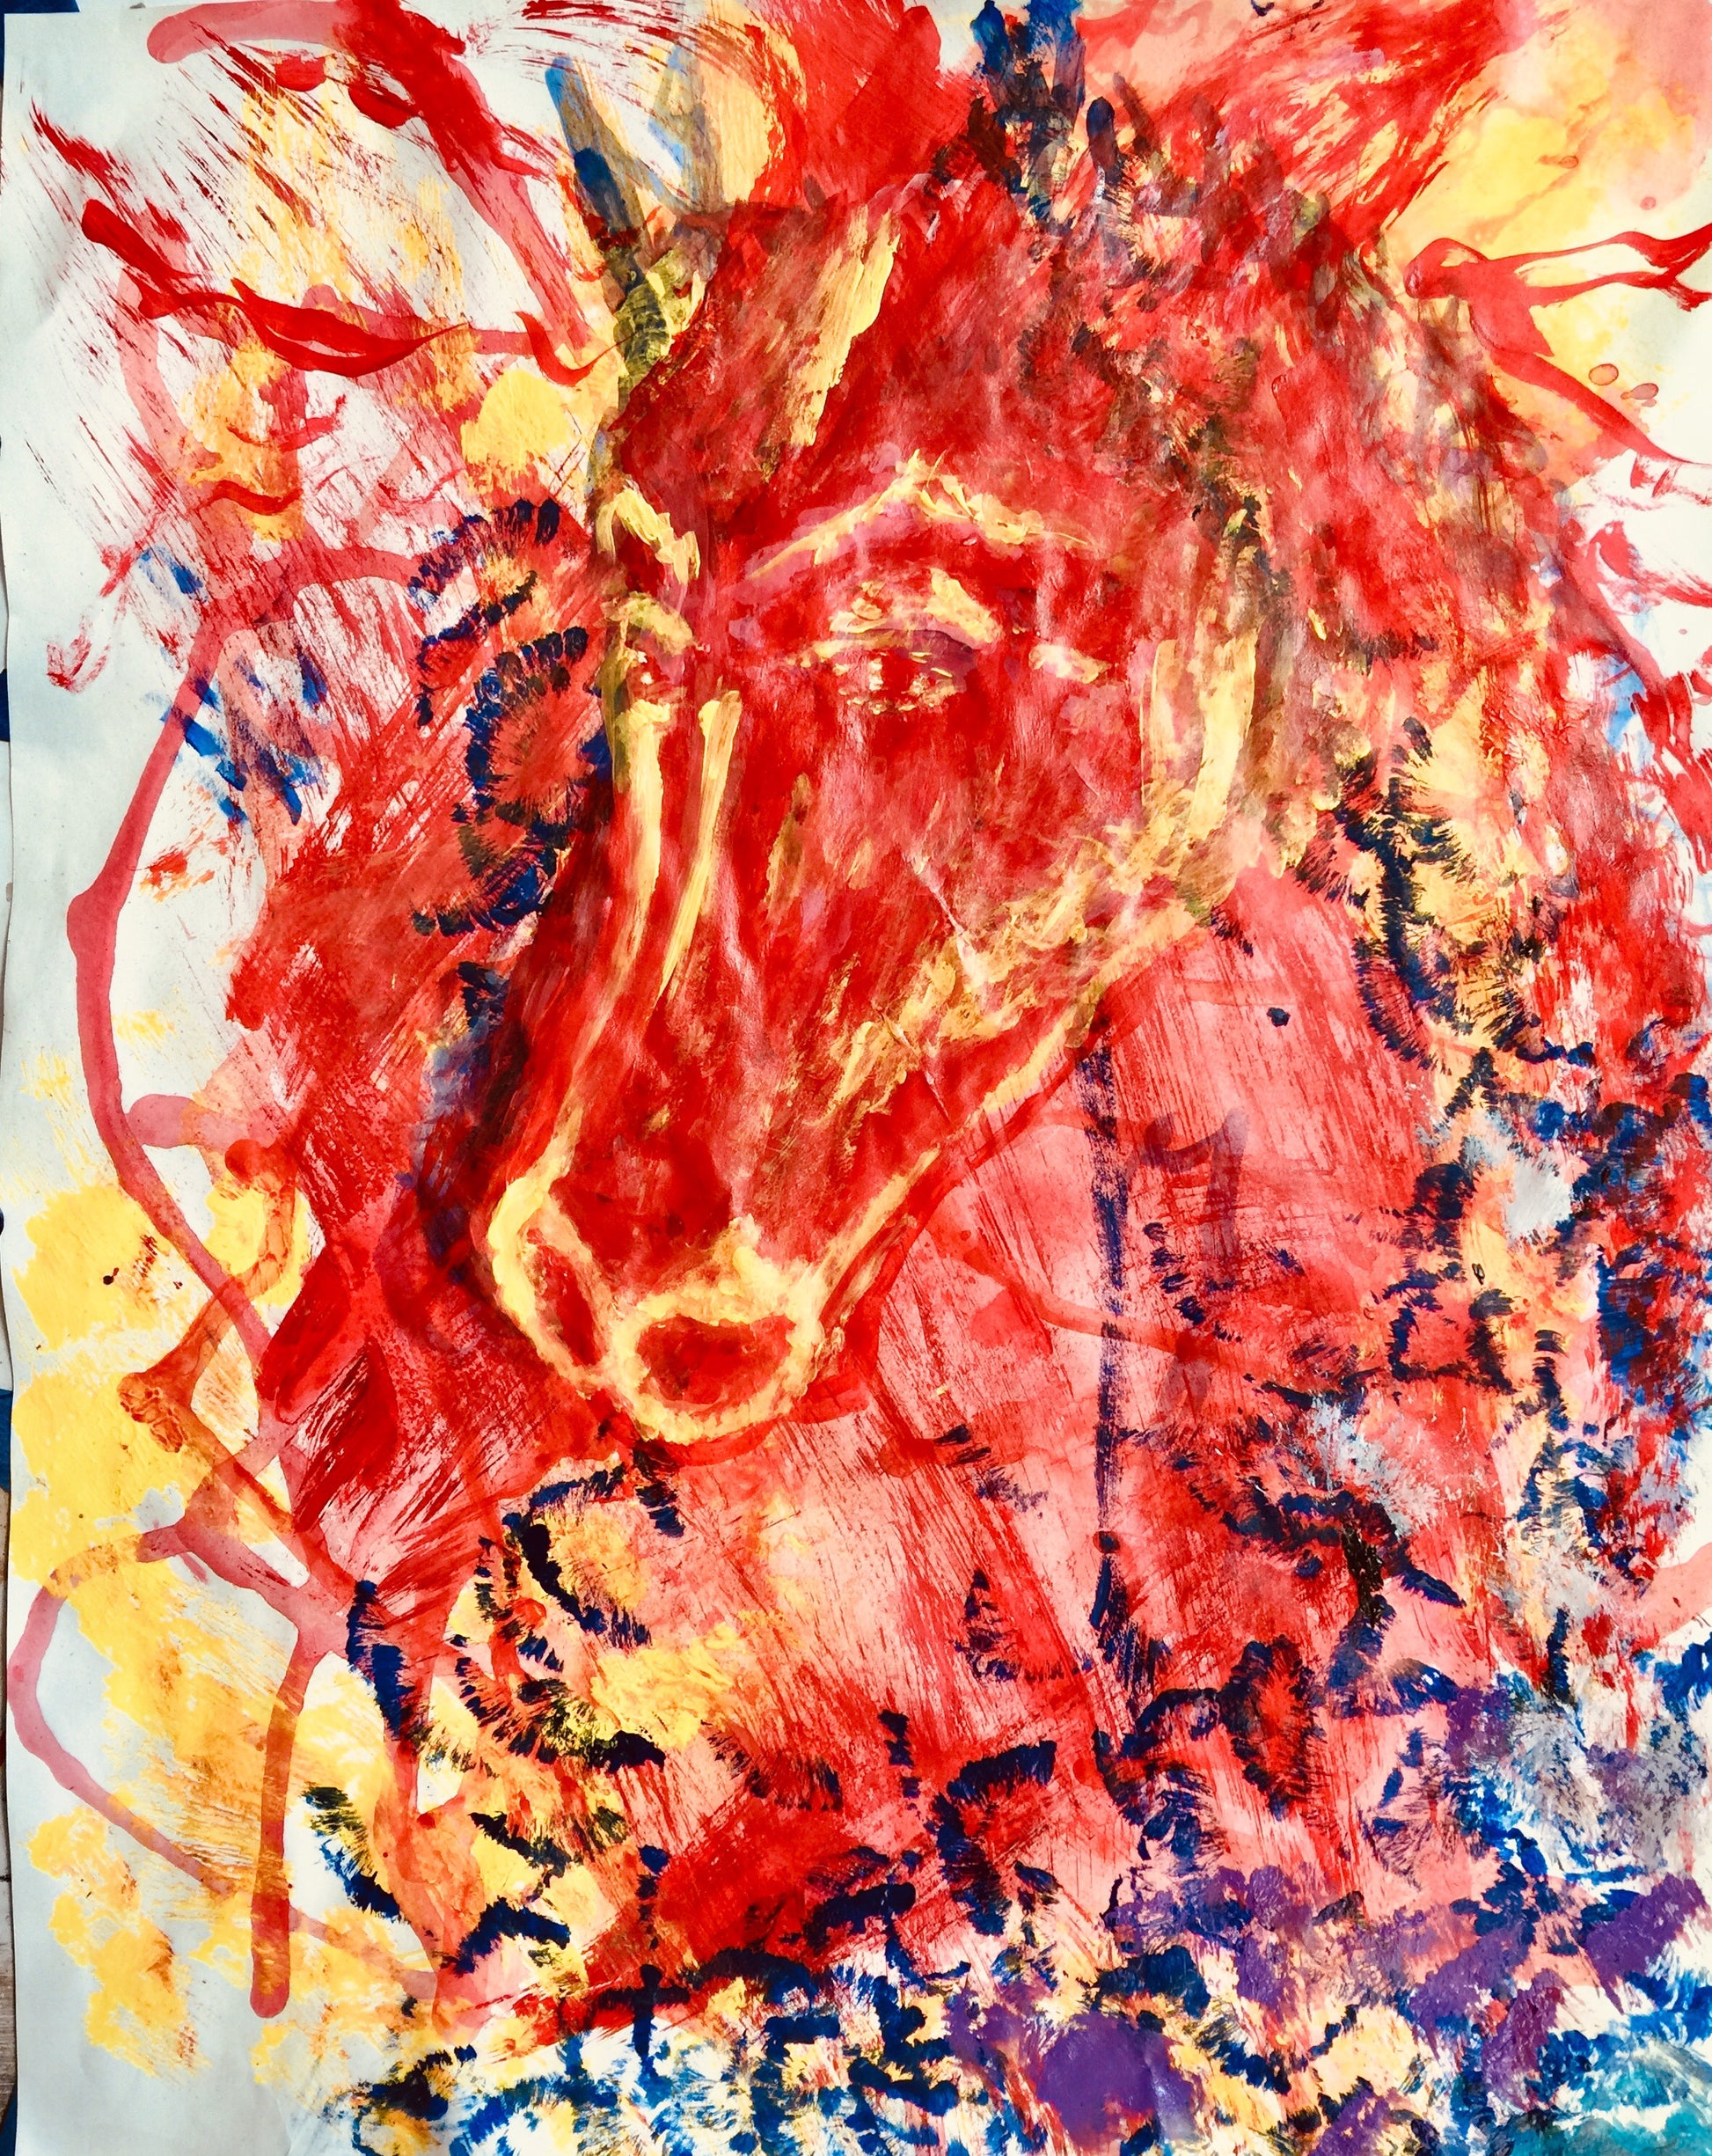 Equine persistence - Sonarta.com Inspired by the song “Wild Fire” by Artist: Michael Martin Murphey.  This Acrylic on Paper is created by Shahla Reynolds. Equine persistence is 19” W x 24” 99H.